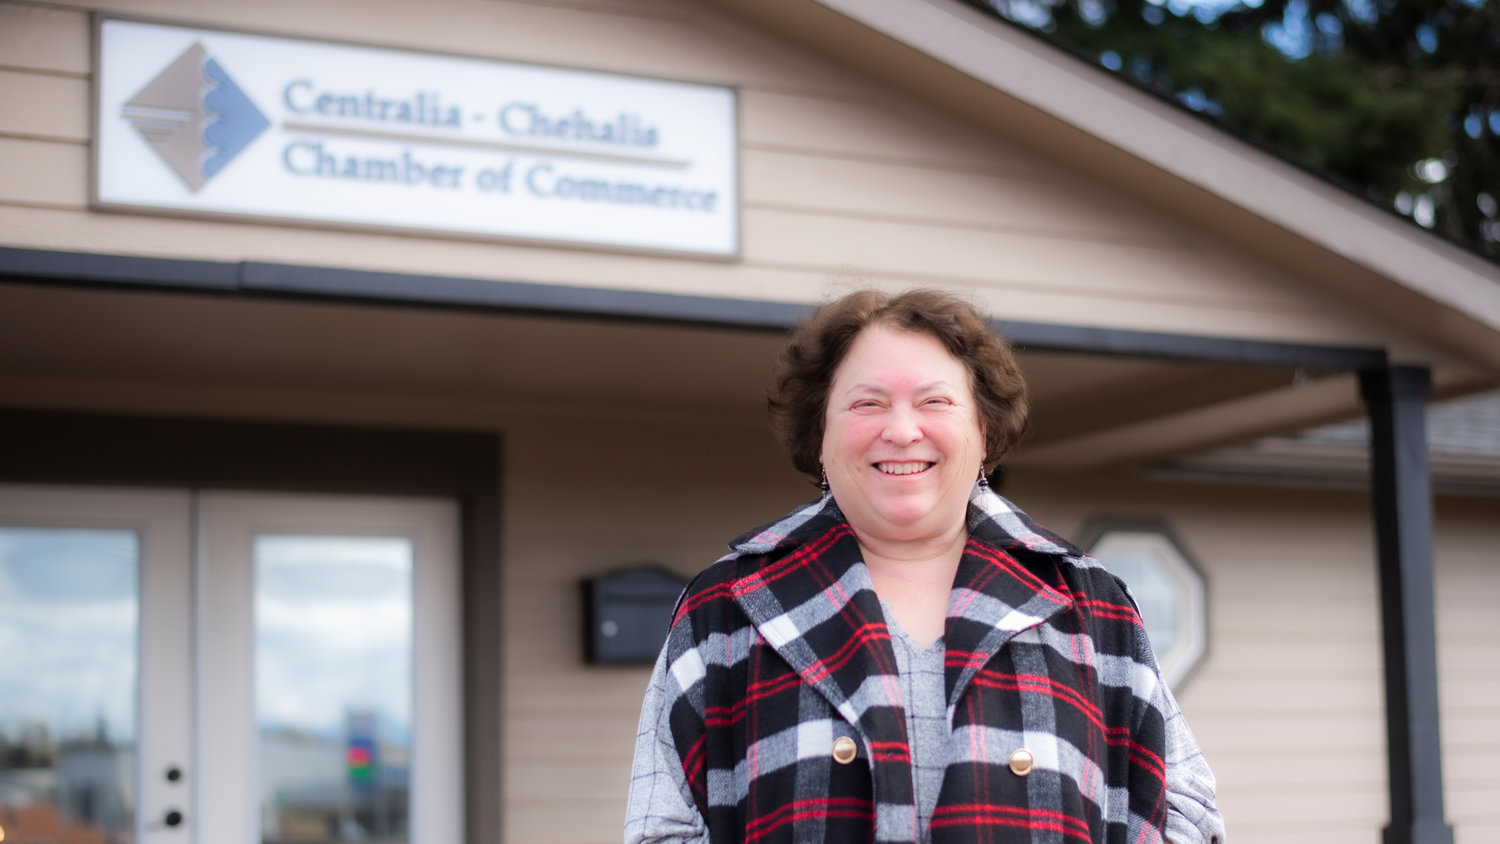 Director Cynthia Mudge smiles for a photo outside the Centralia-Chehalis Chamber office Thursday in Chehalis.